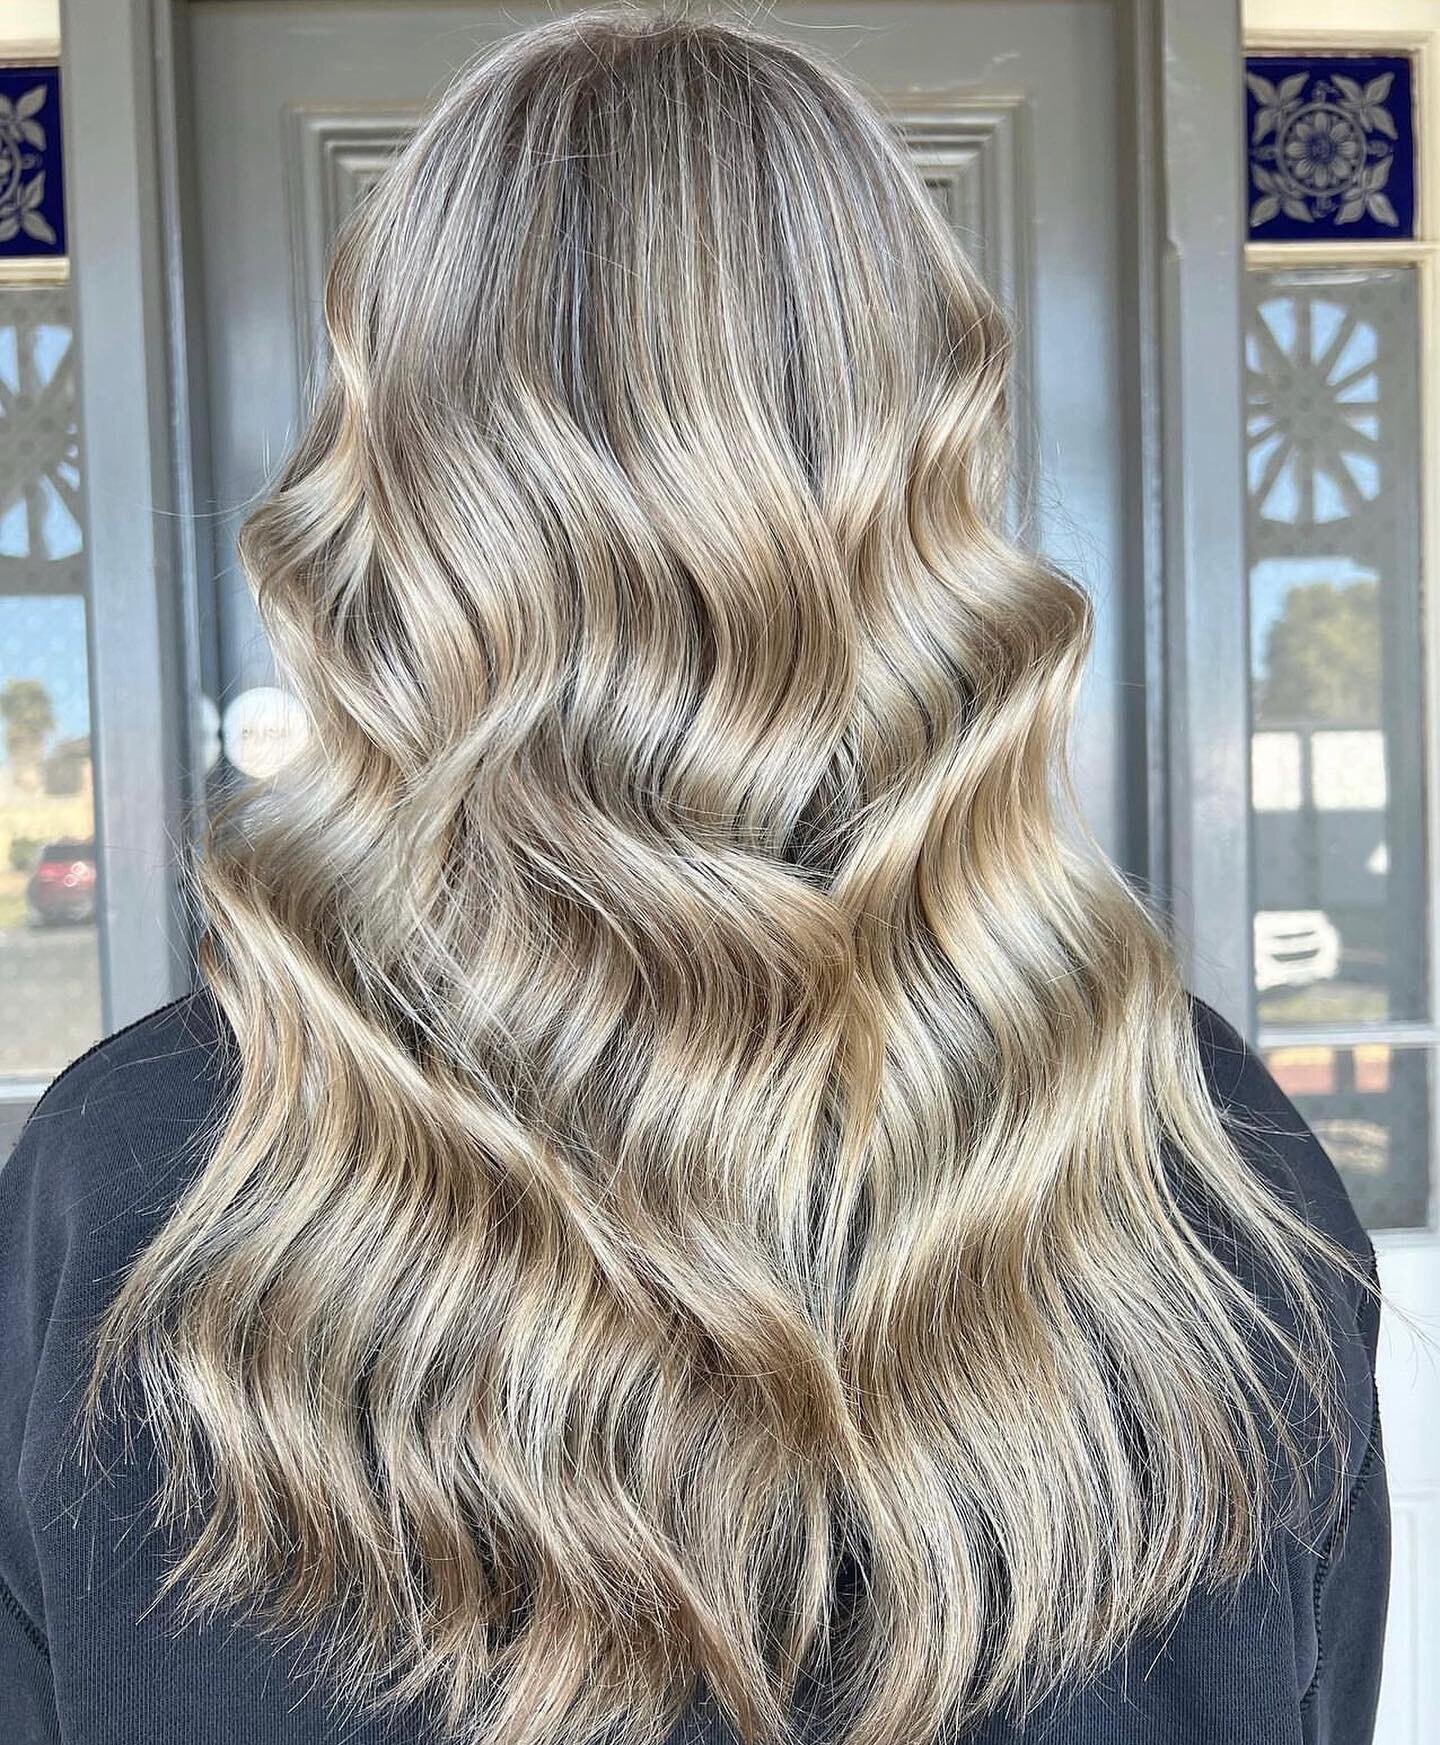 Gorgeous balayage makeover created by @teagan_hairhouseboutique 💜

Swipe to check out the before photo 

#hairhouseboutiquebendigo #bendigohair #bendigohairdresser #metaldetox #frenchbalayageaus #doitwithdia #blondstudioloreal #lorealpro @lorealpro_